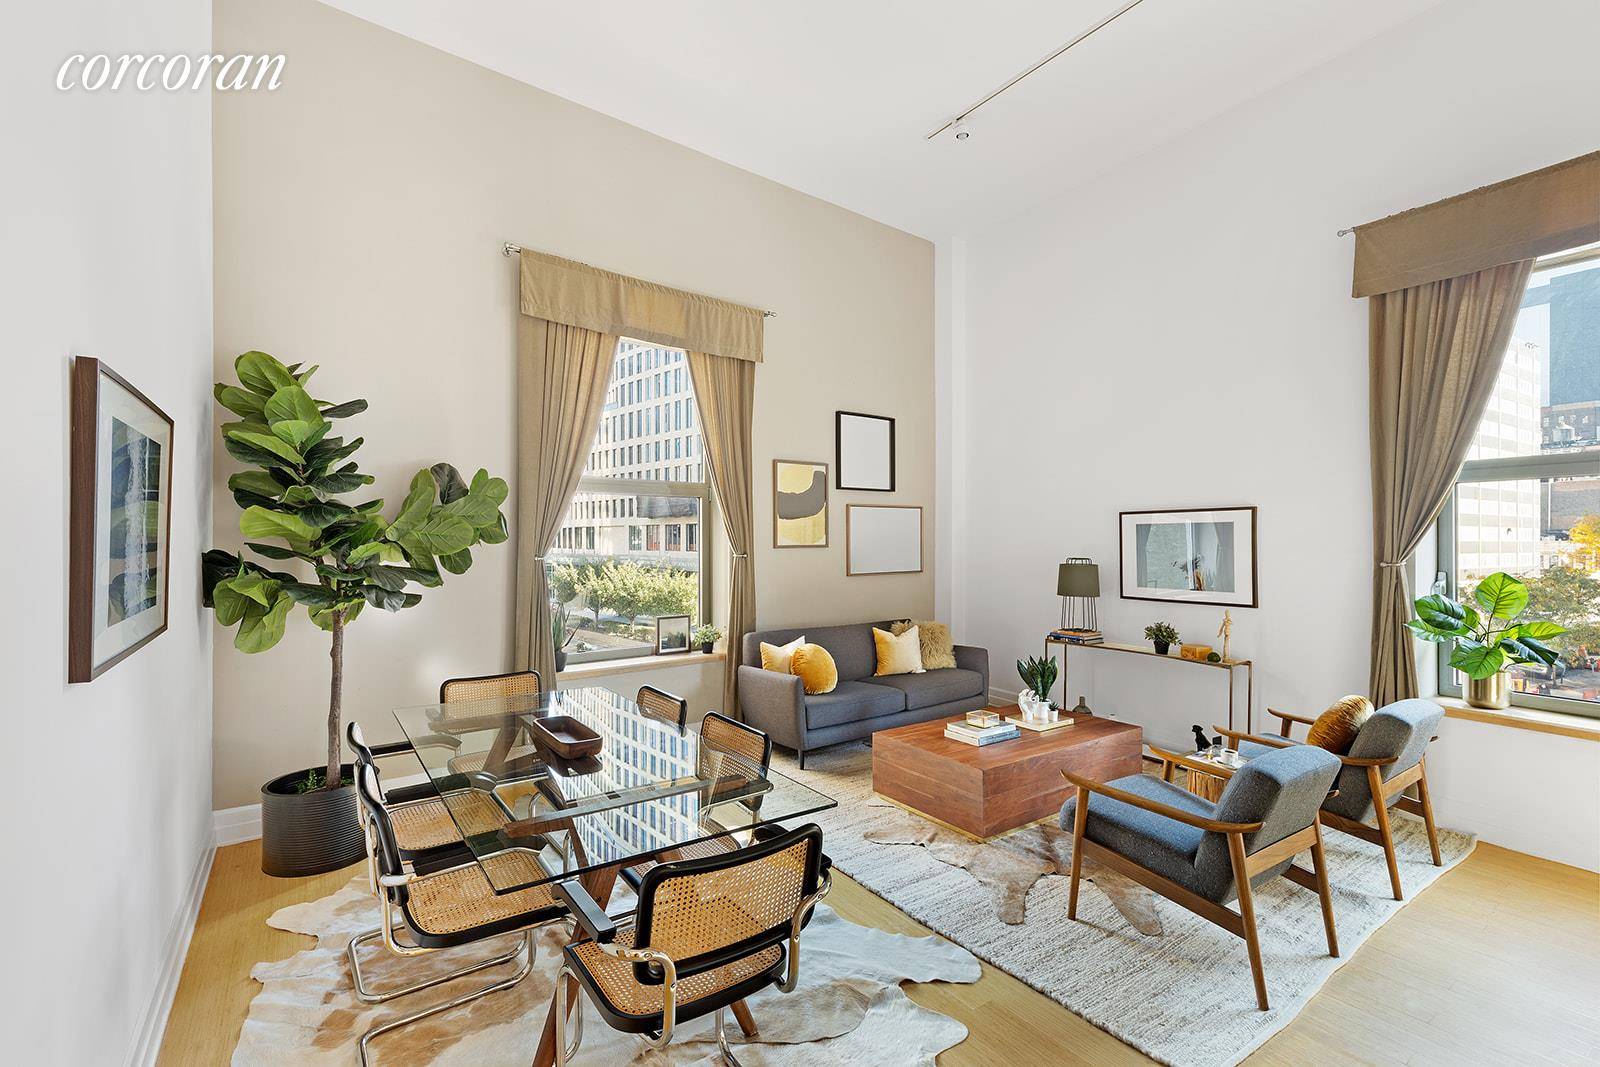 Have you been looking for a non cookie cutter condo with grand proportions, incredible light, and full service amenities in the most central Brooklyn location ?